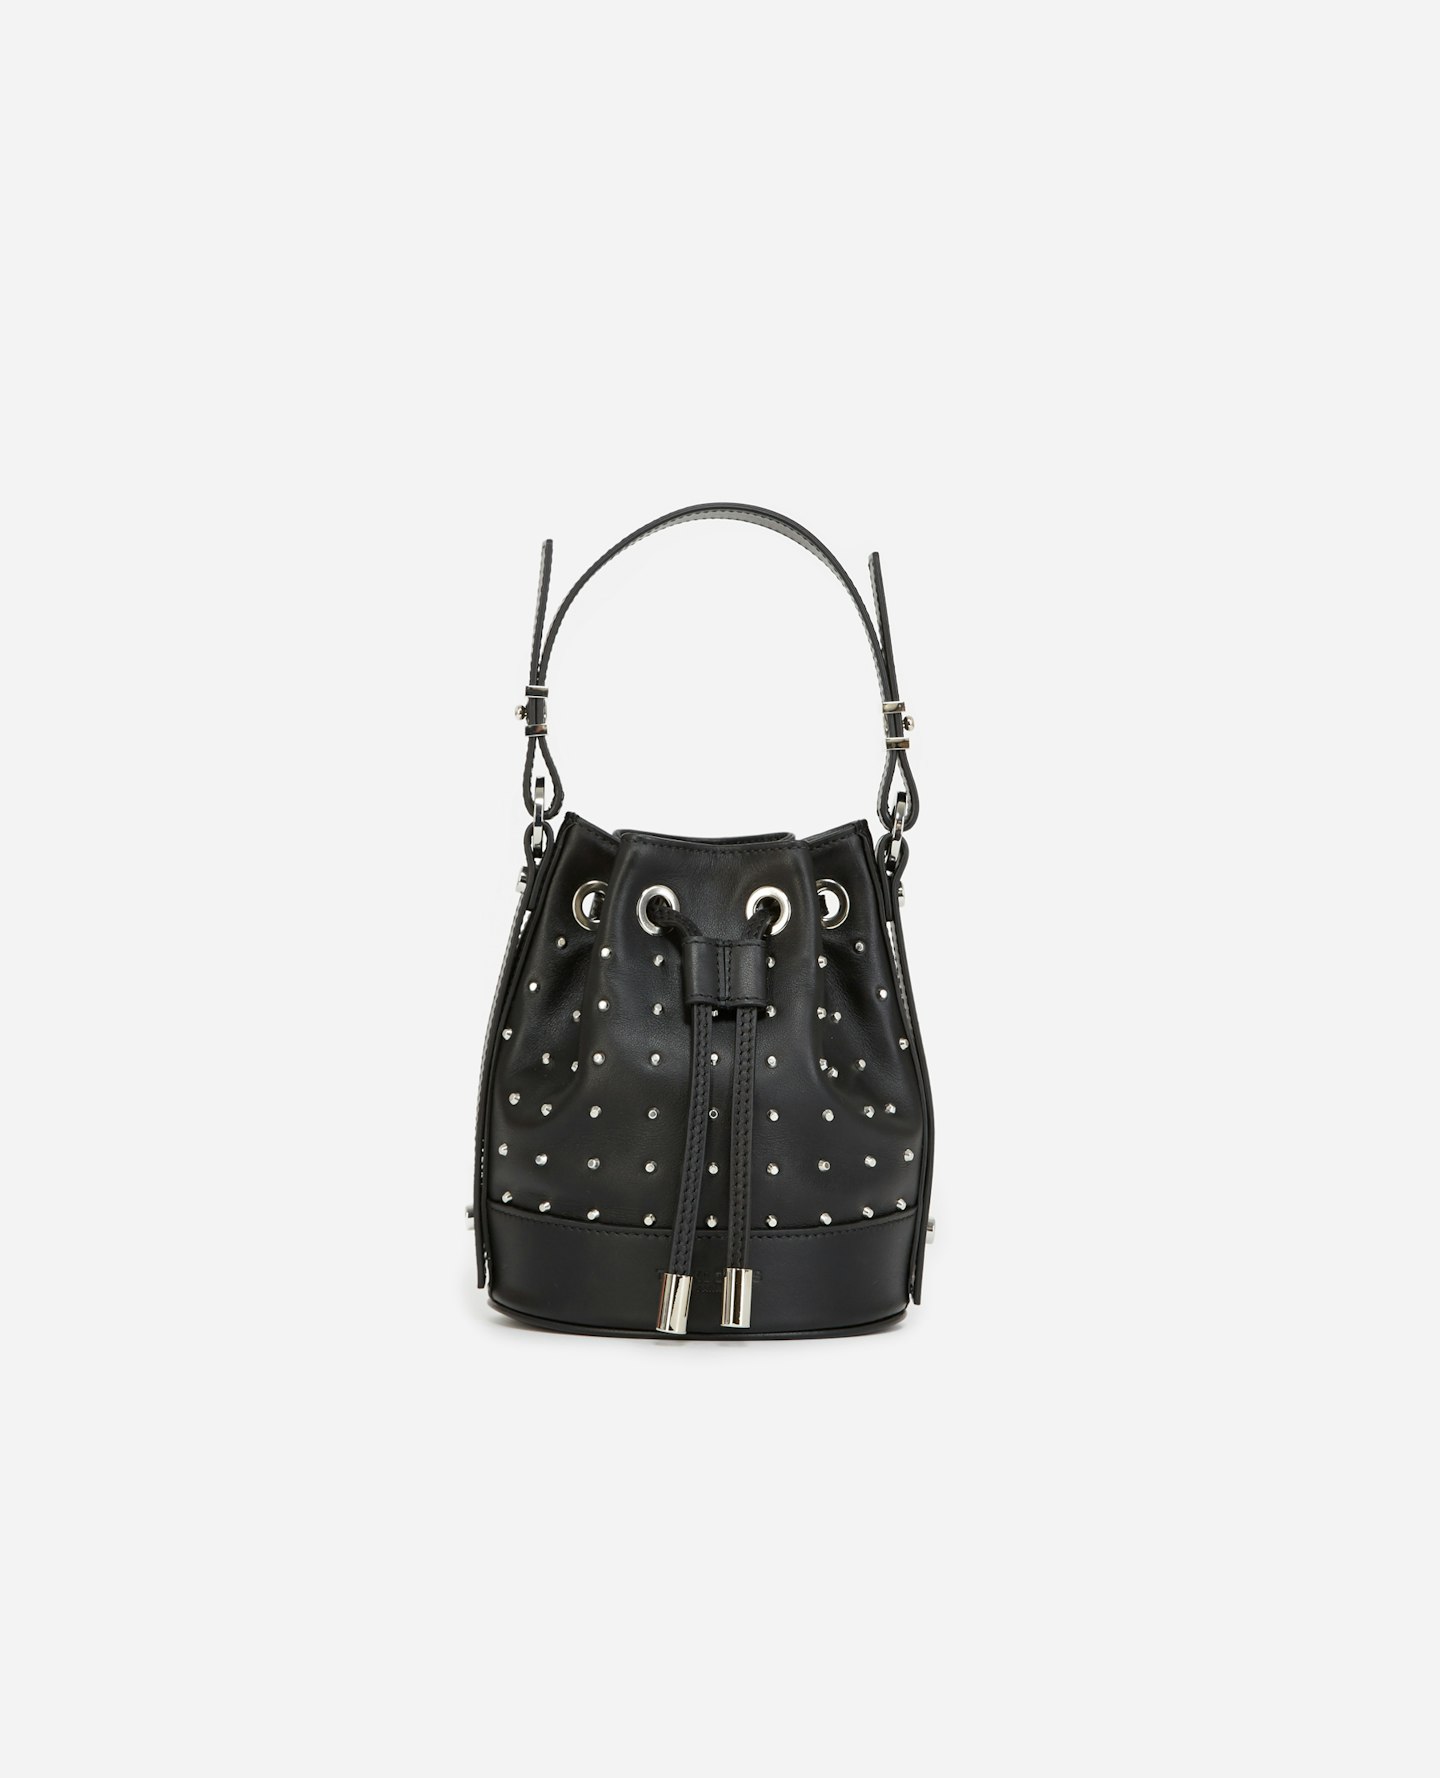 The Kooples, Studded Nano Tina Bag In Smooth Black Leather, £280